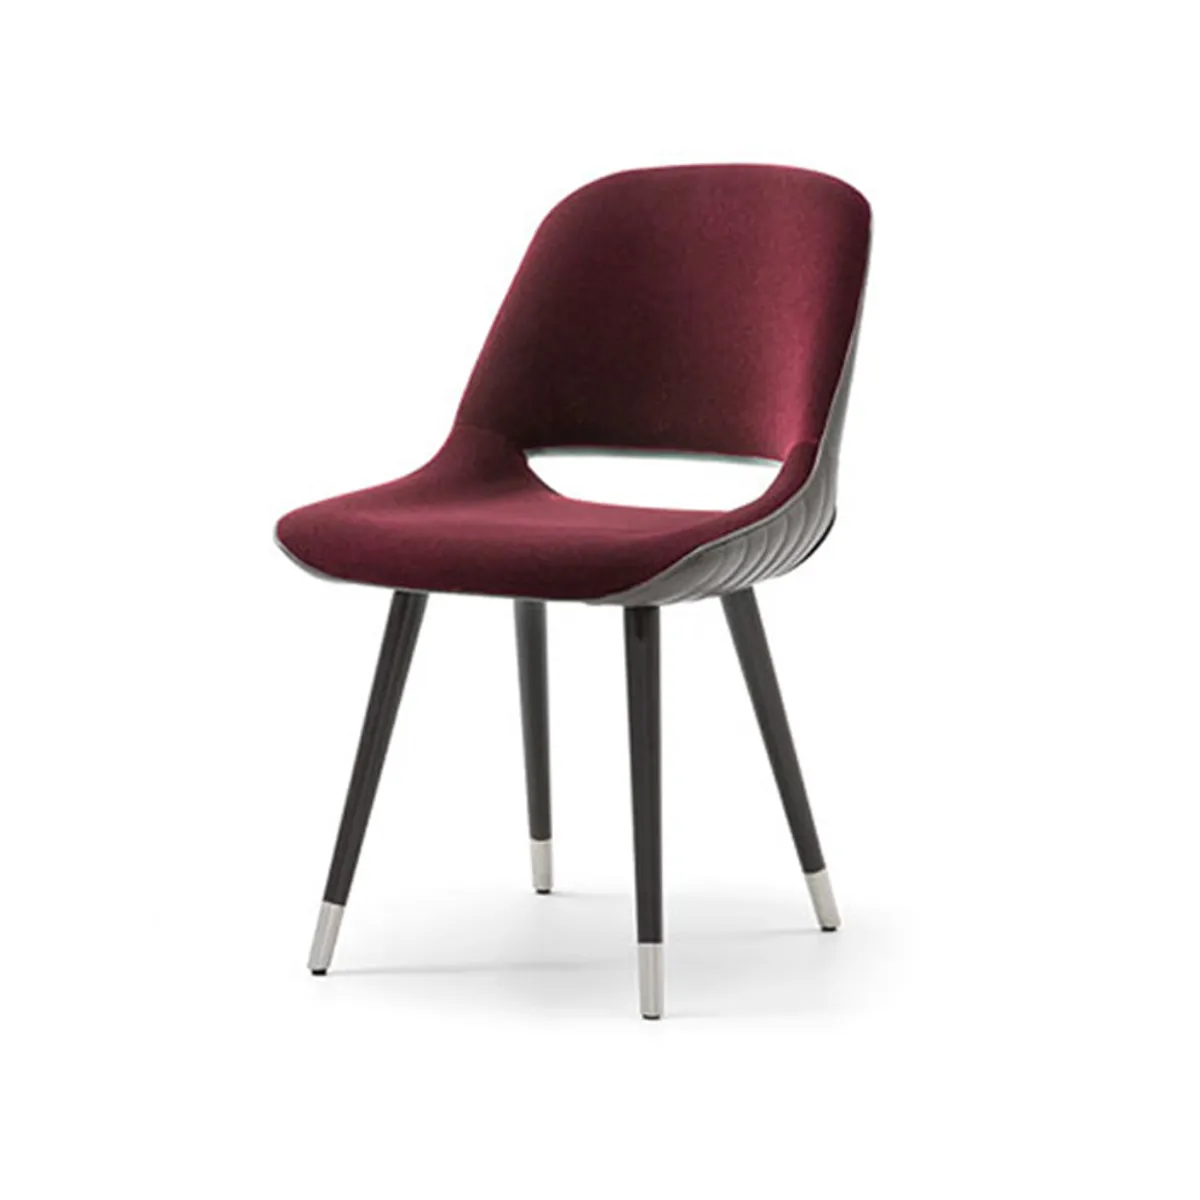 Somers Sidechair Insideoutcontracts2